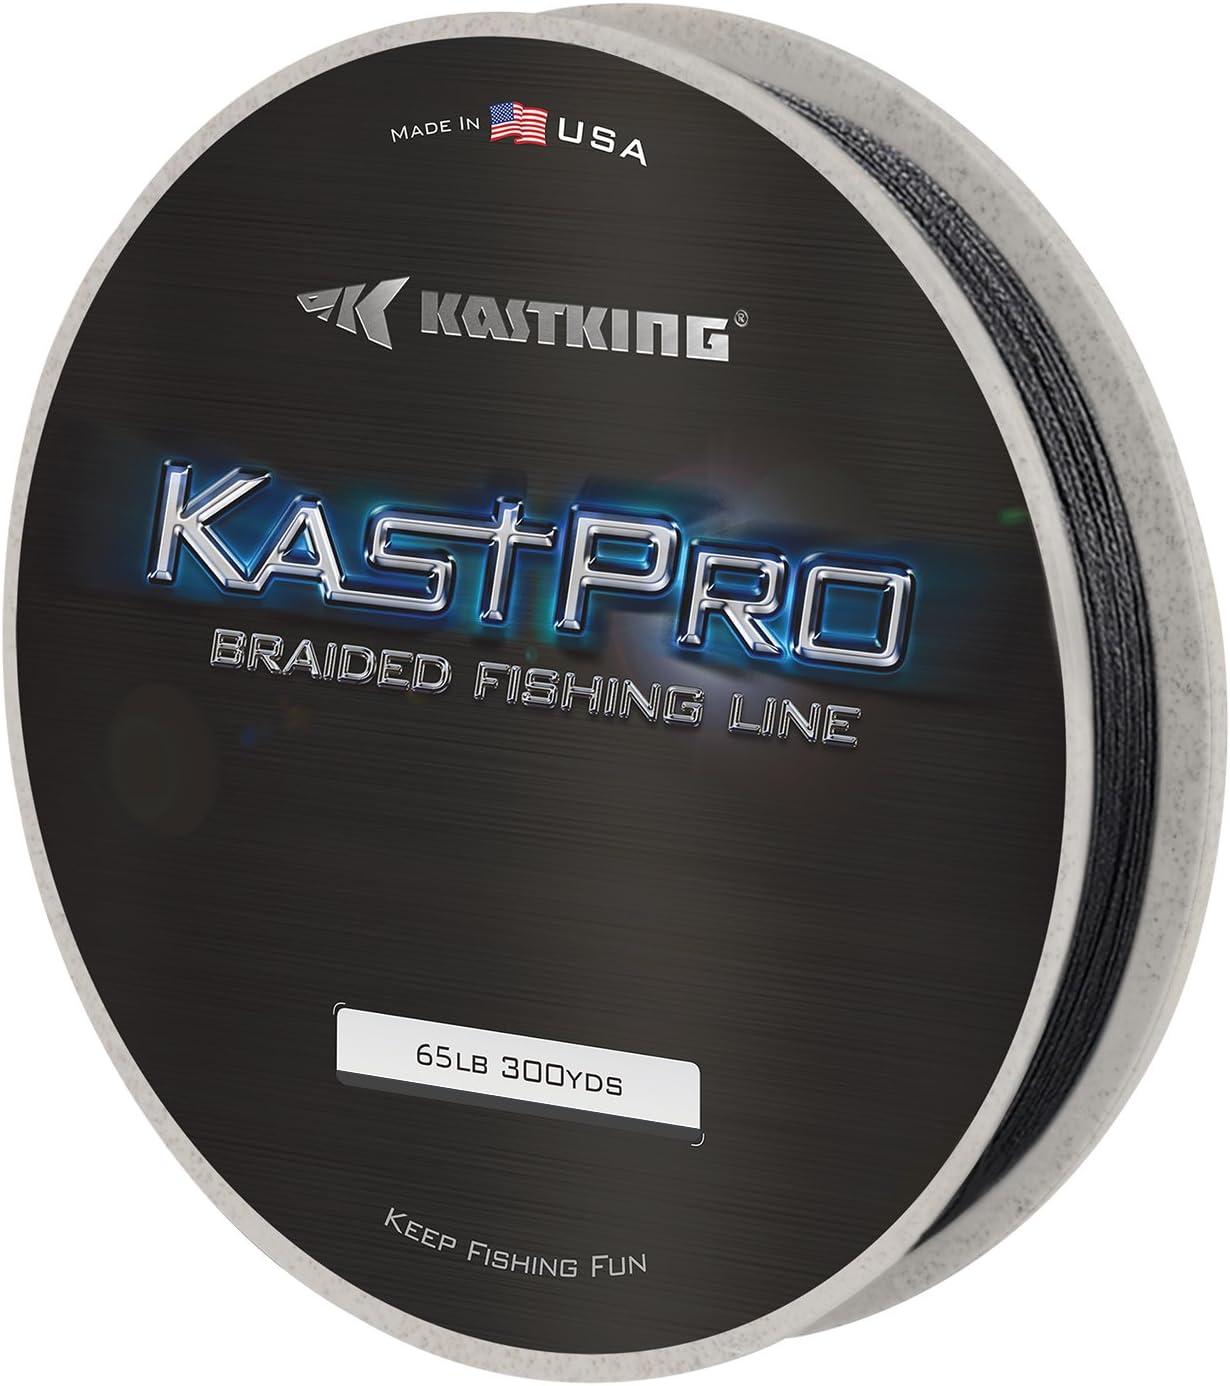 KastKing KastPro Braided Fishing Line - Spectra Super Line - Made in The USA  - Zero Stretch Braid - Thin Diameter - On Biodegradable BioSpool! -  Aggressive Weave - Incredible Abrasion Resistance! Black Out 150 Yds -20LB  -0.008